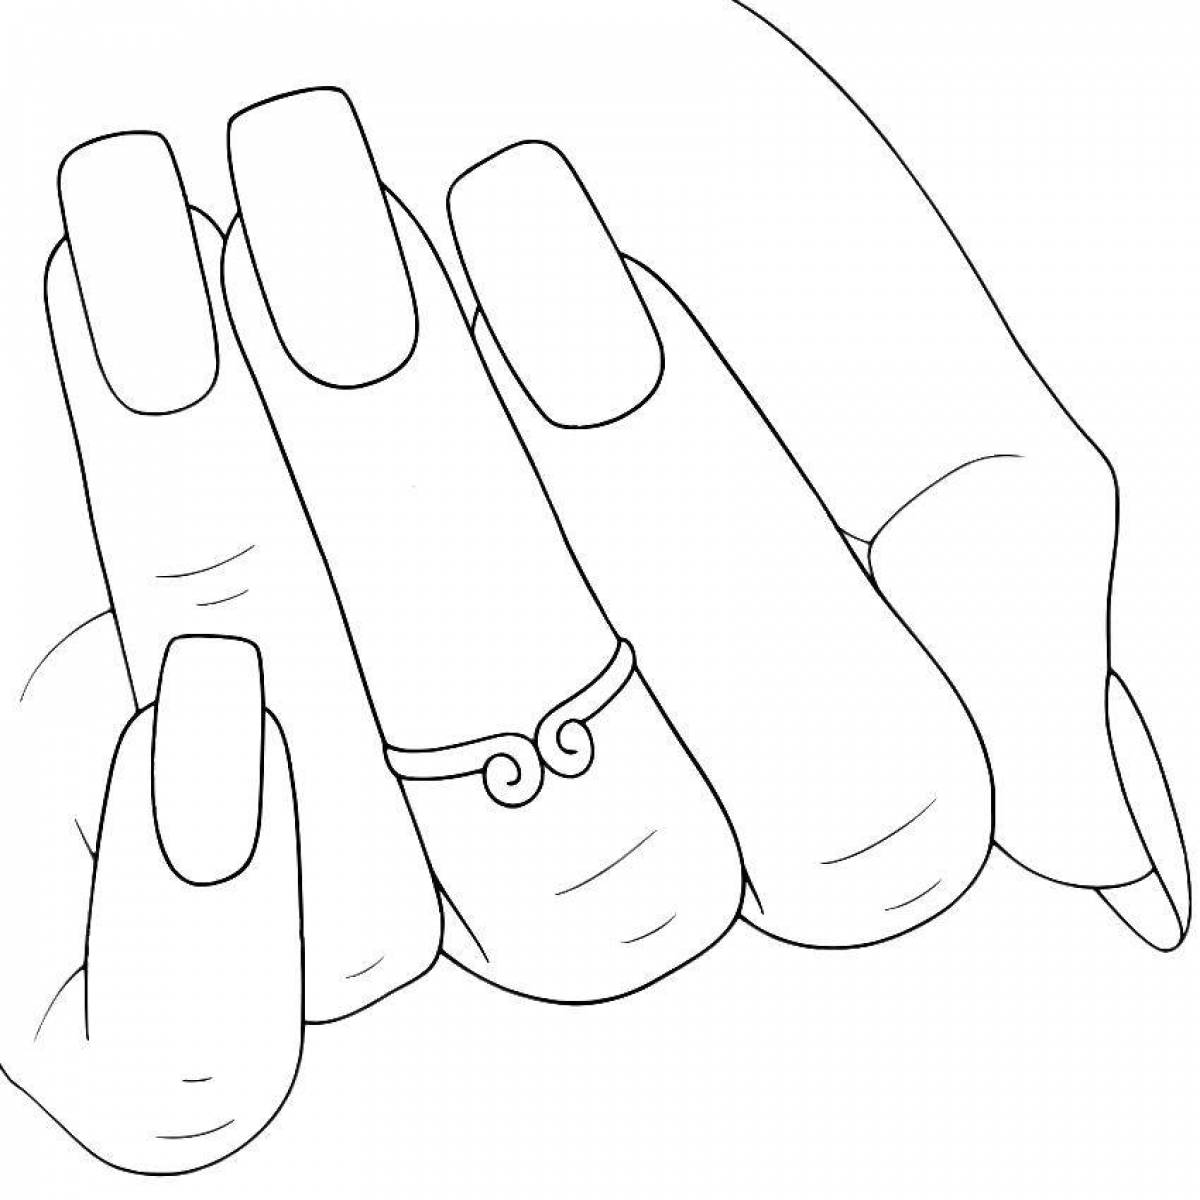 Exquisite pattern nail coloring page